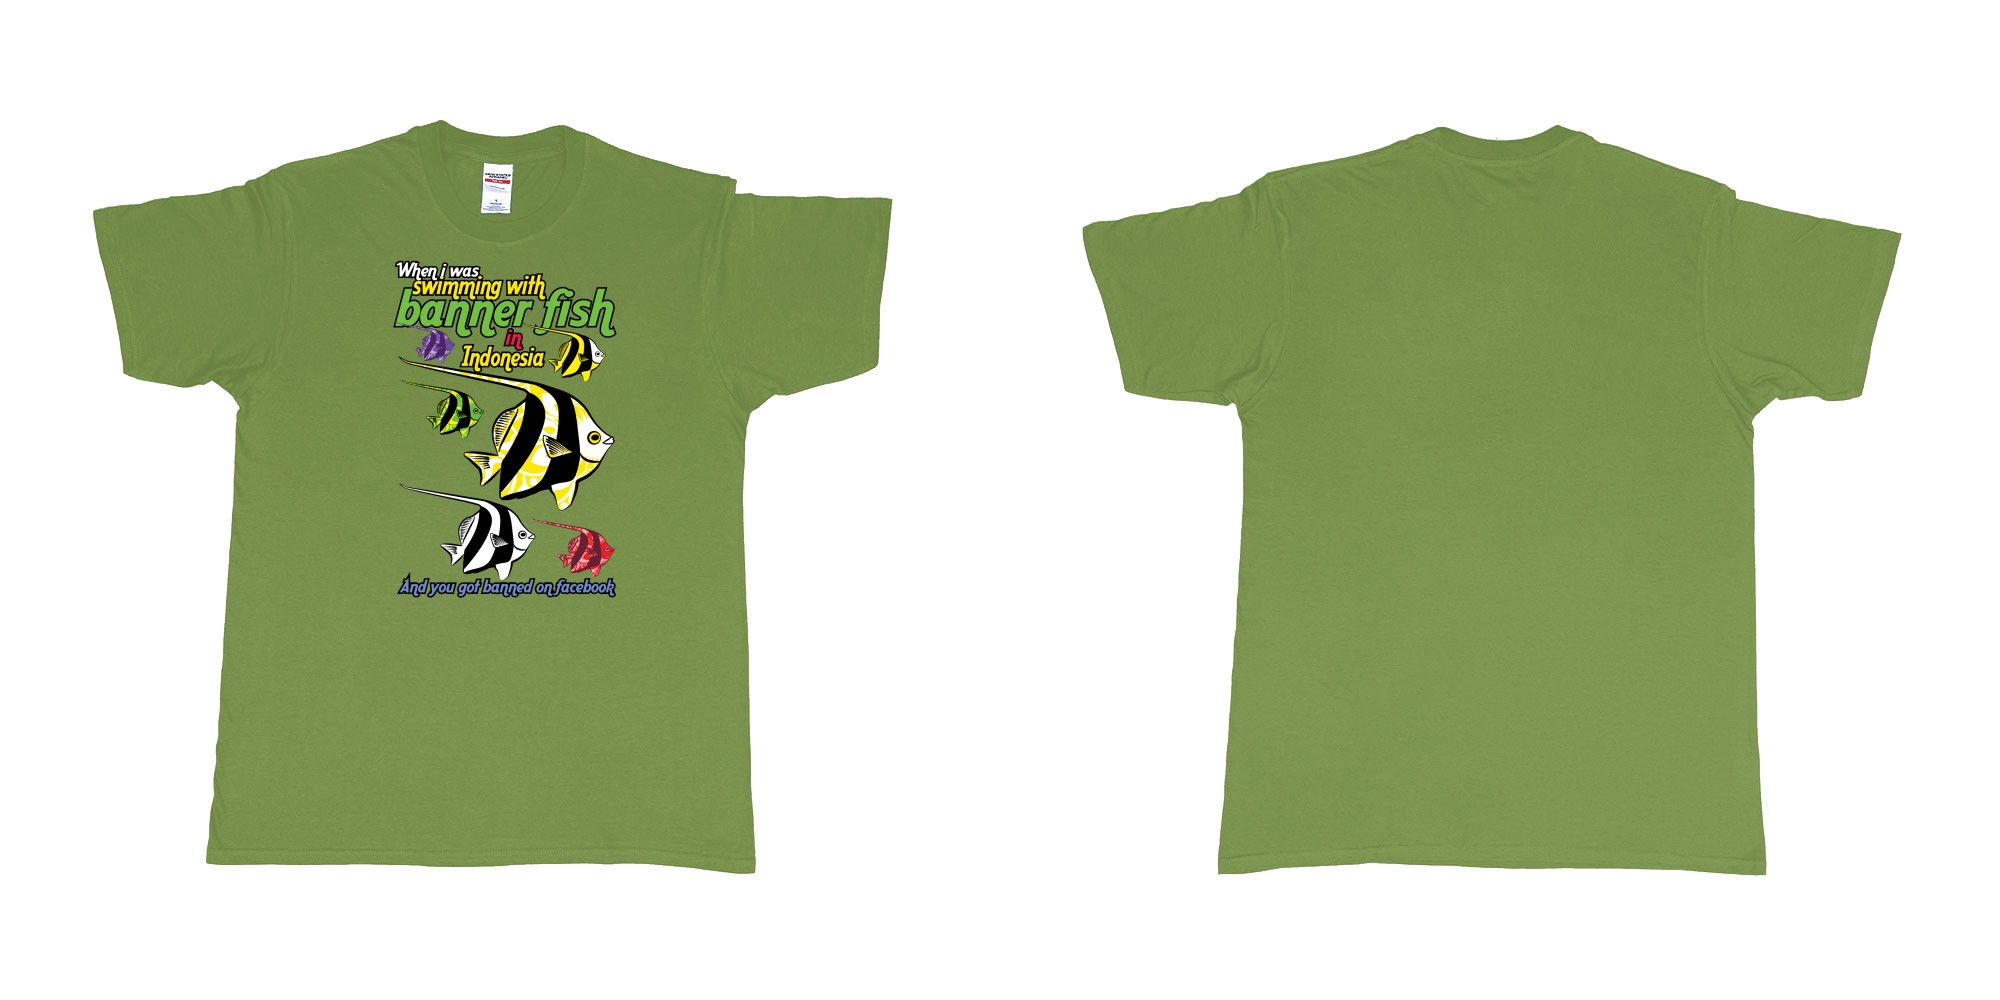 Custom tshirt design when i was swimming with banner fish in indonesia and you got banned from facebook in fabric color military-green choice your own text made in Bali by The Pirate Way